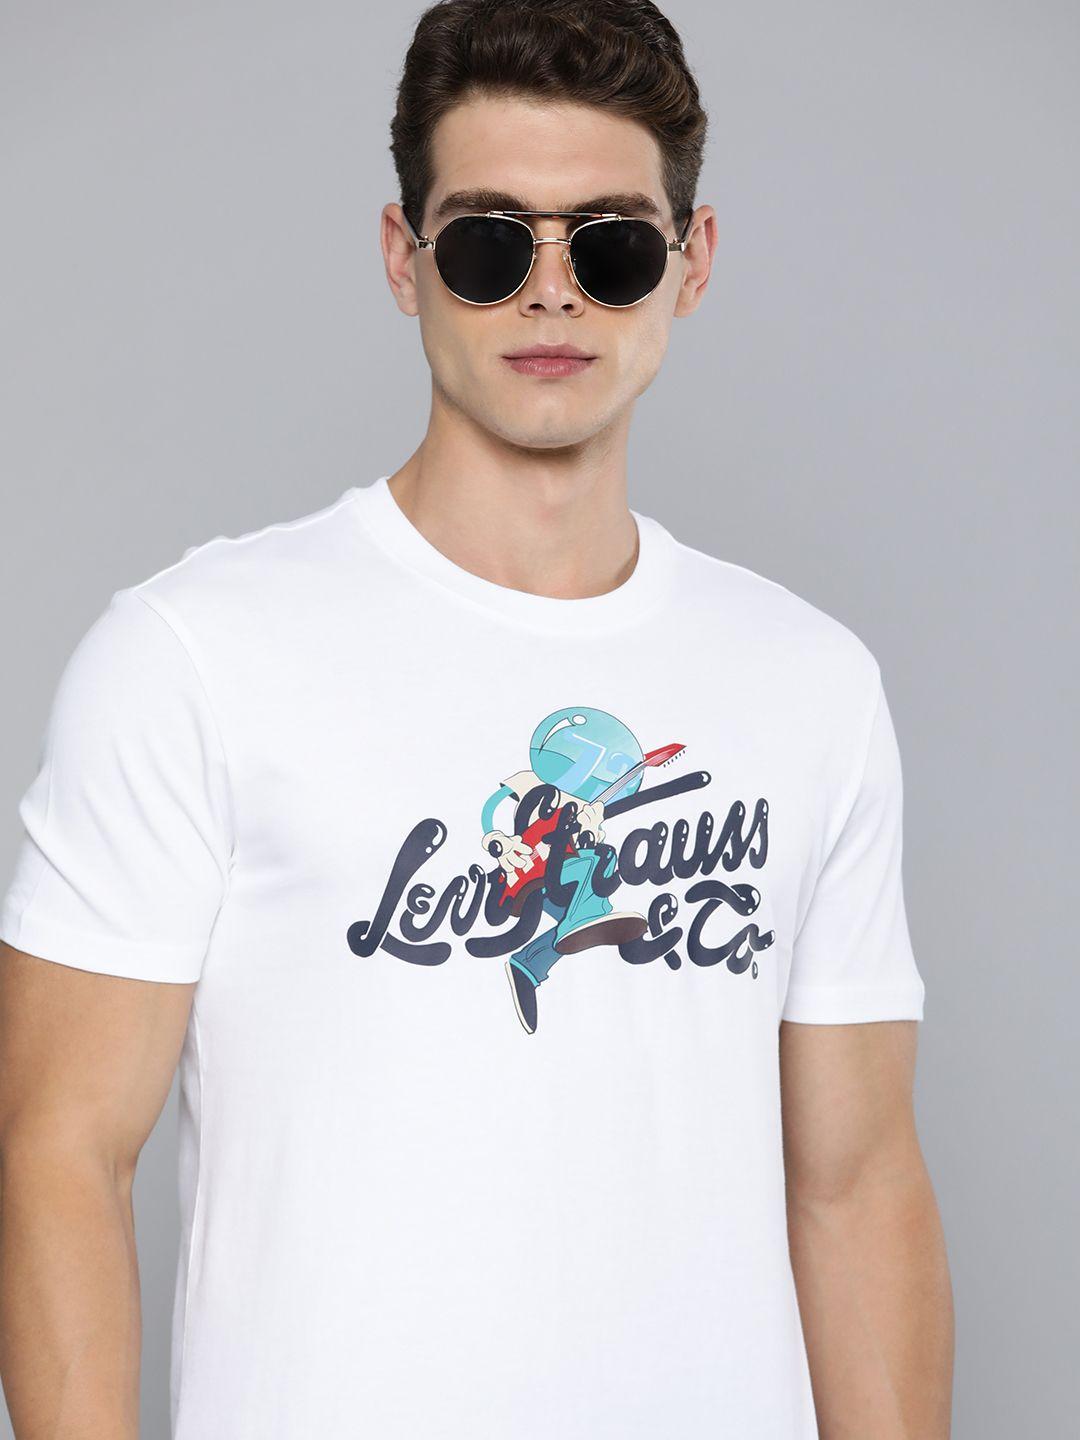 levis pure cotton graphic printed casual t-shirt